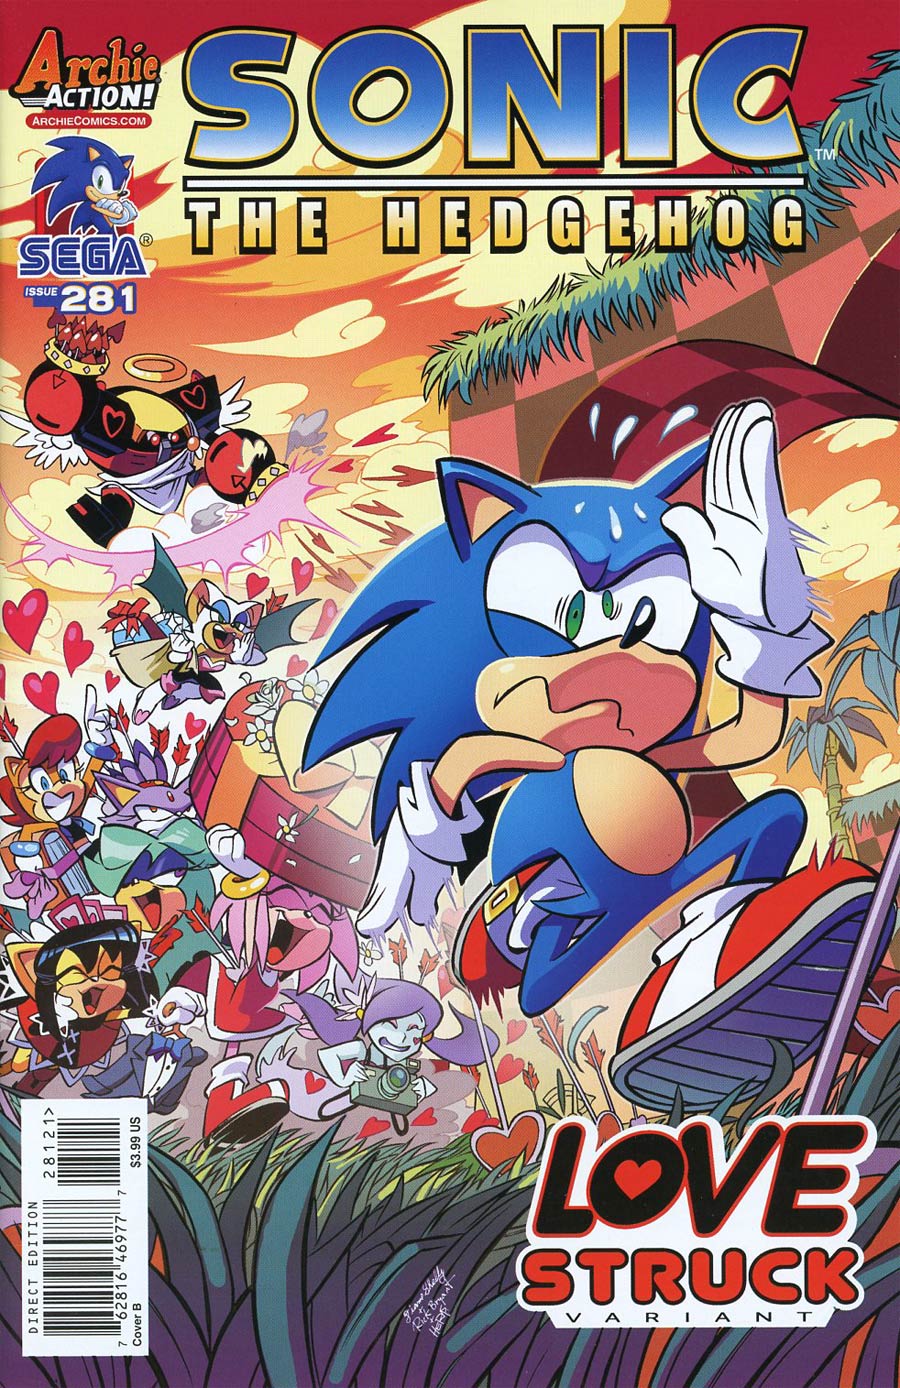 Sonic The Hedgehog Vol 2 #281 Cover B Variant Diana Skelly Cover